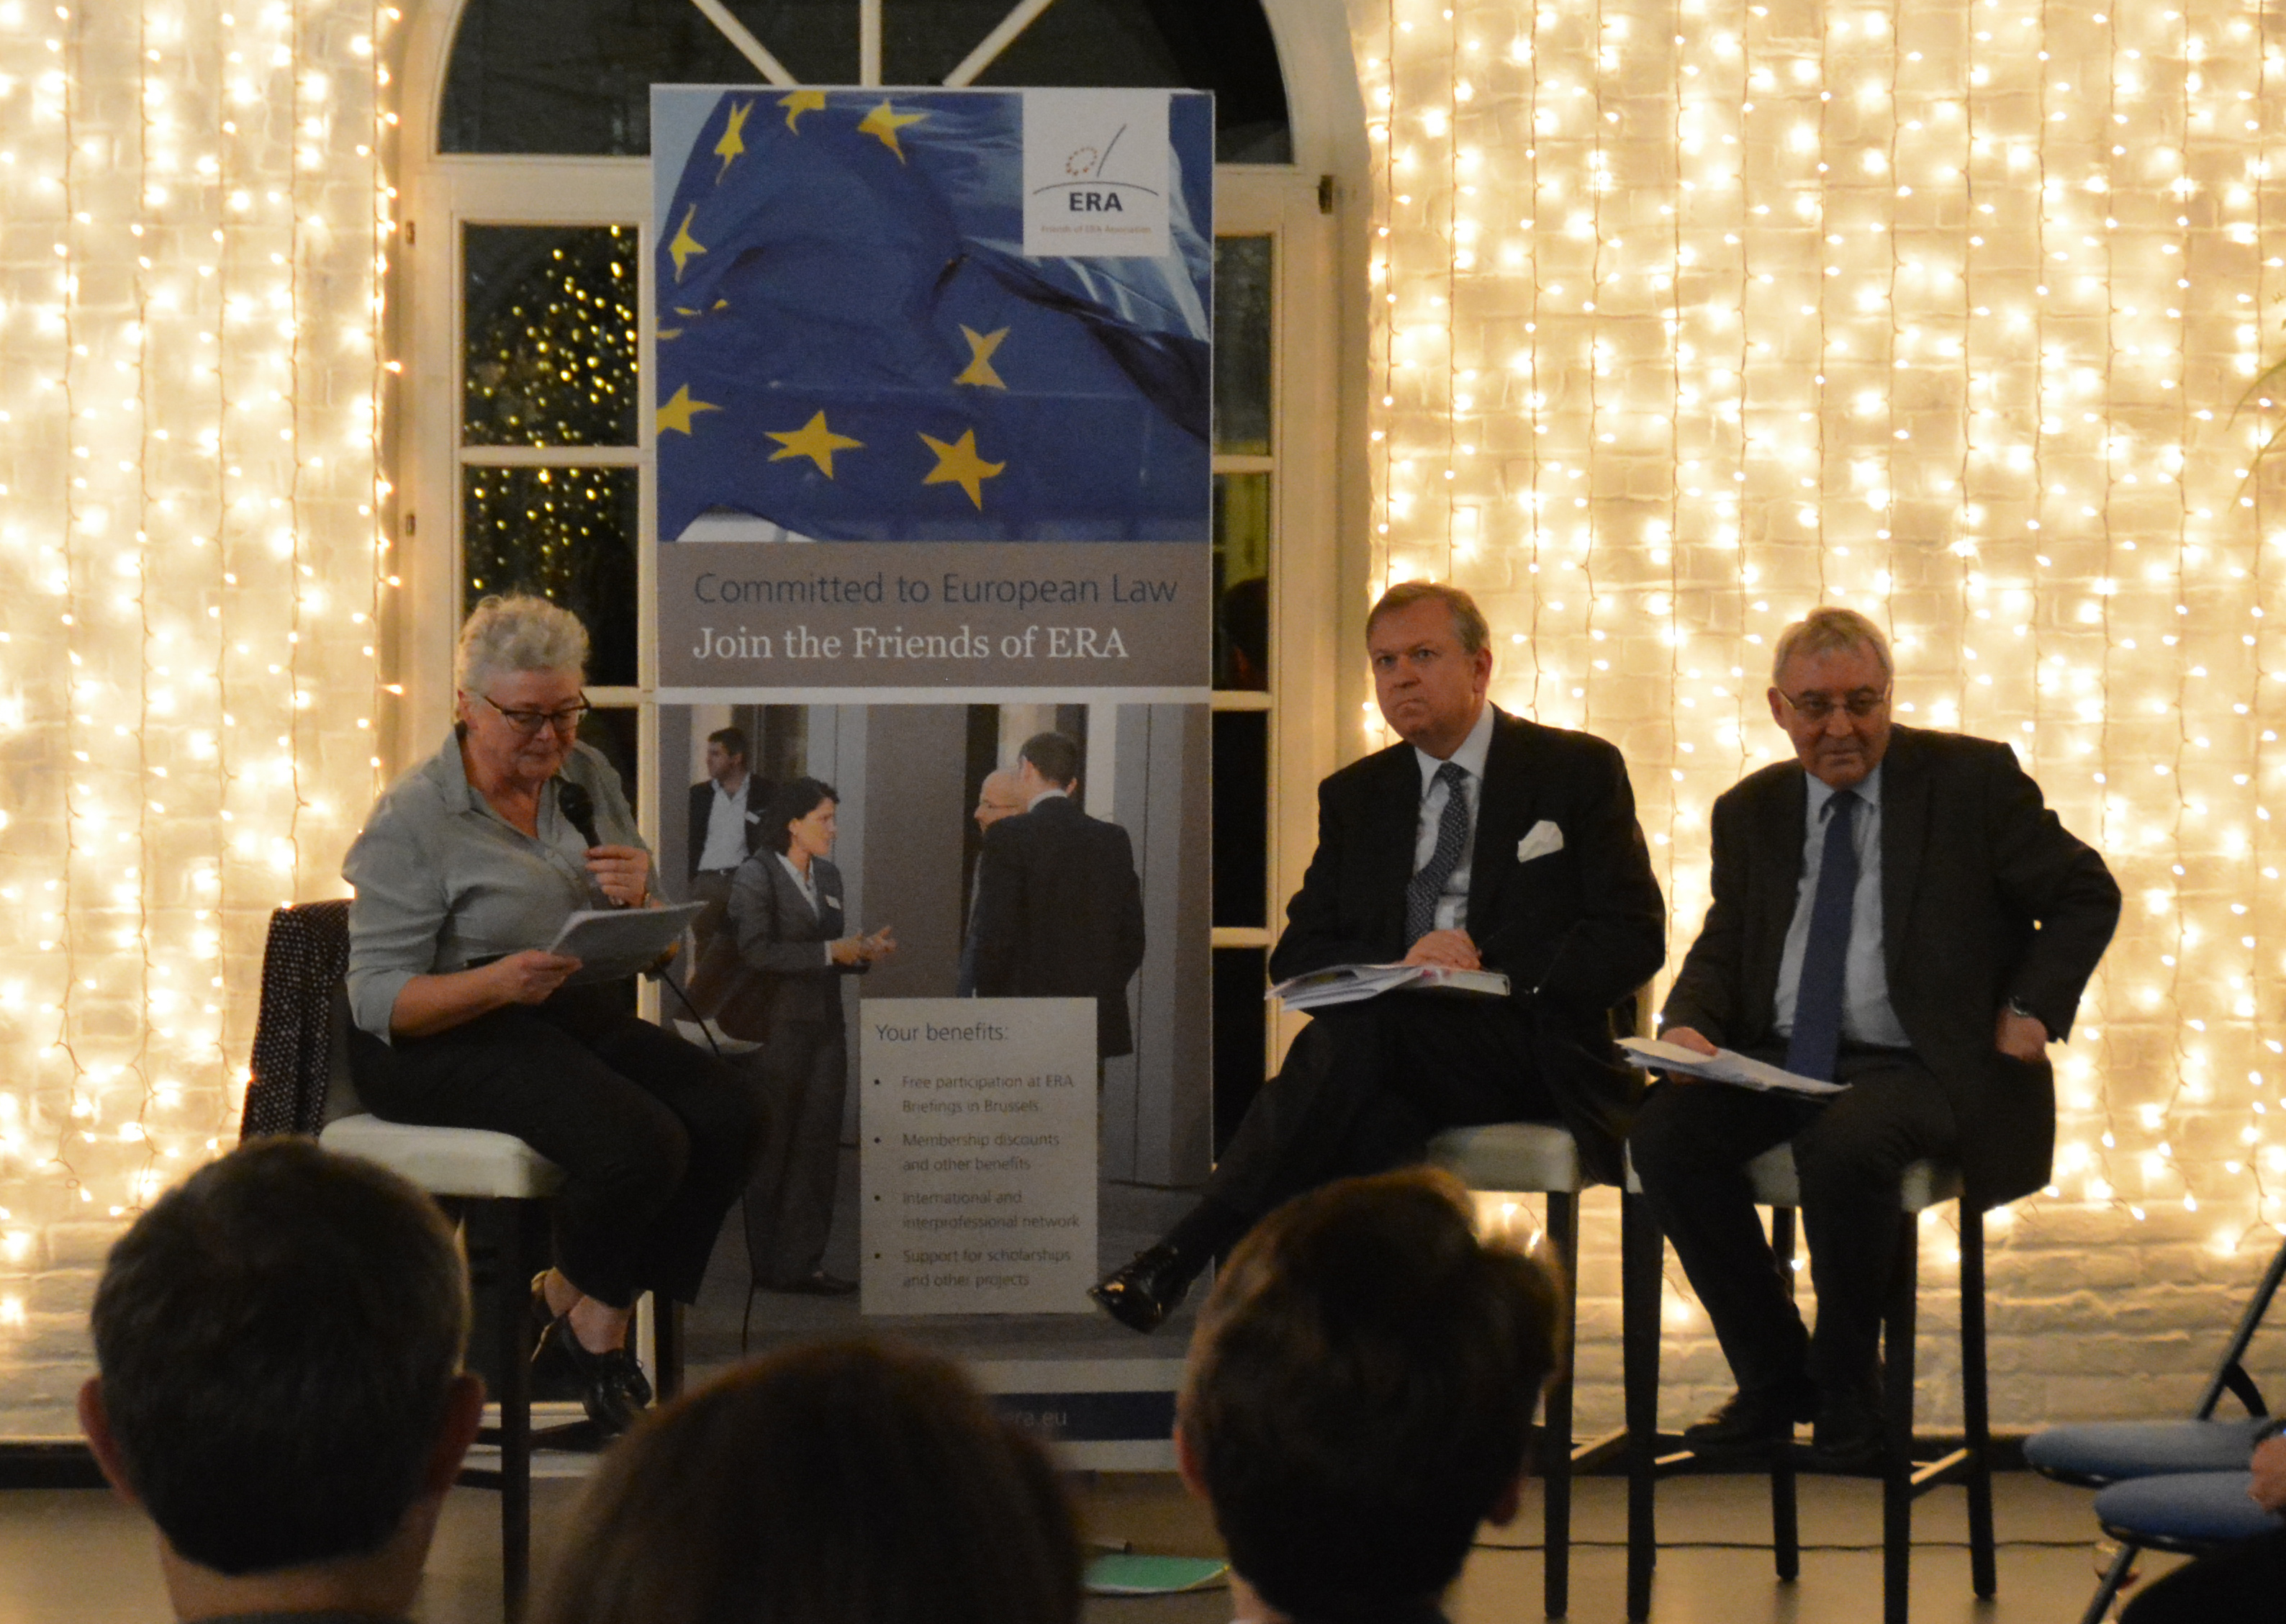 “Challenges of the European Union - The way forward after BREXIT”